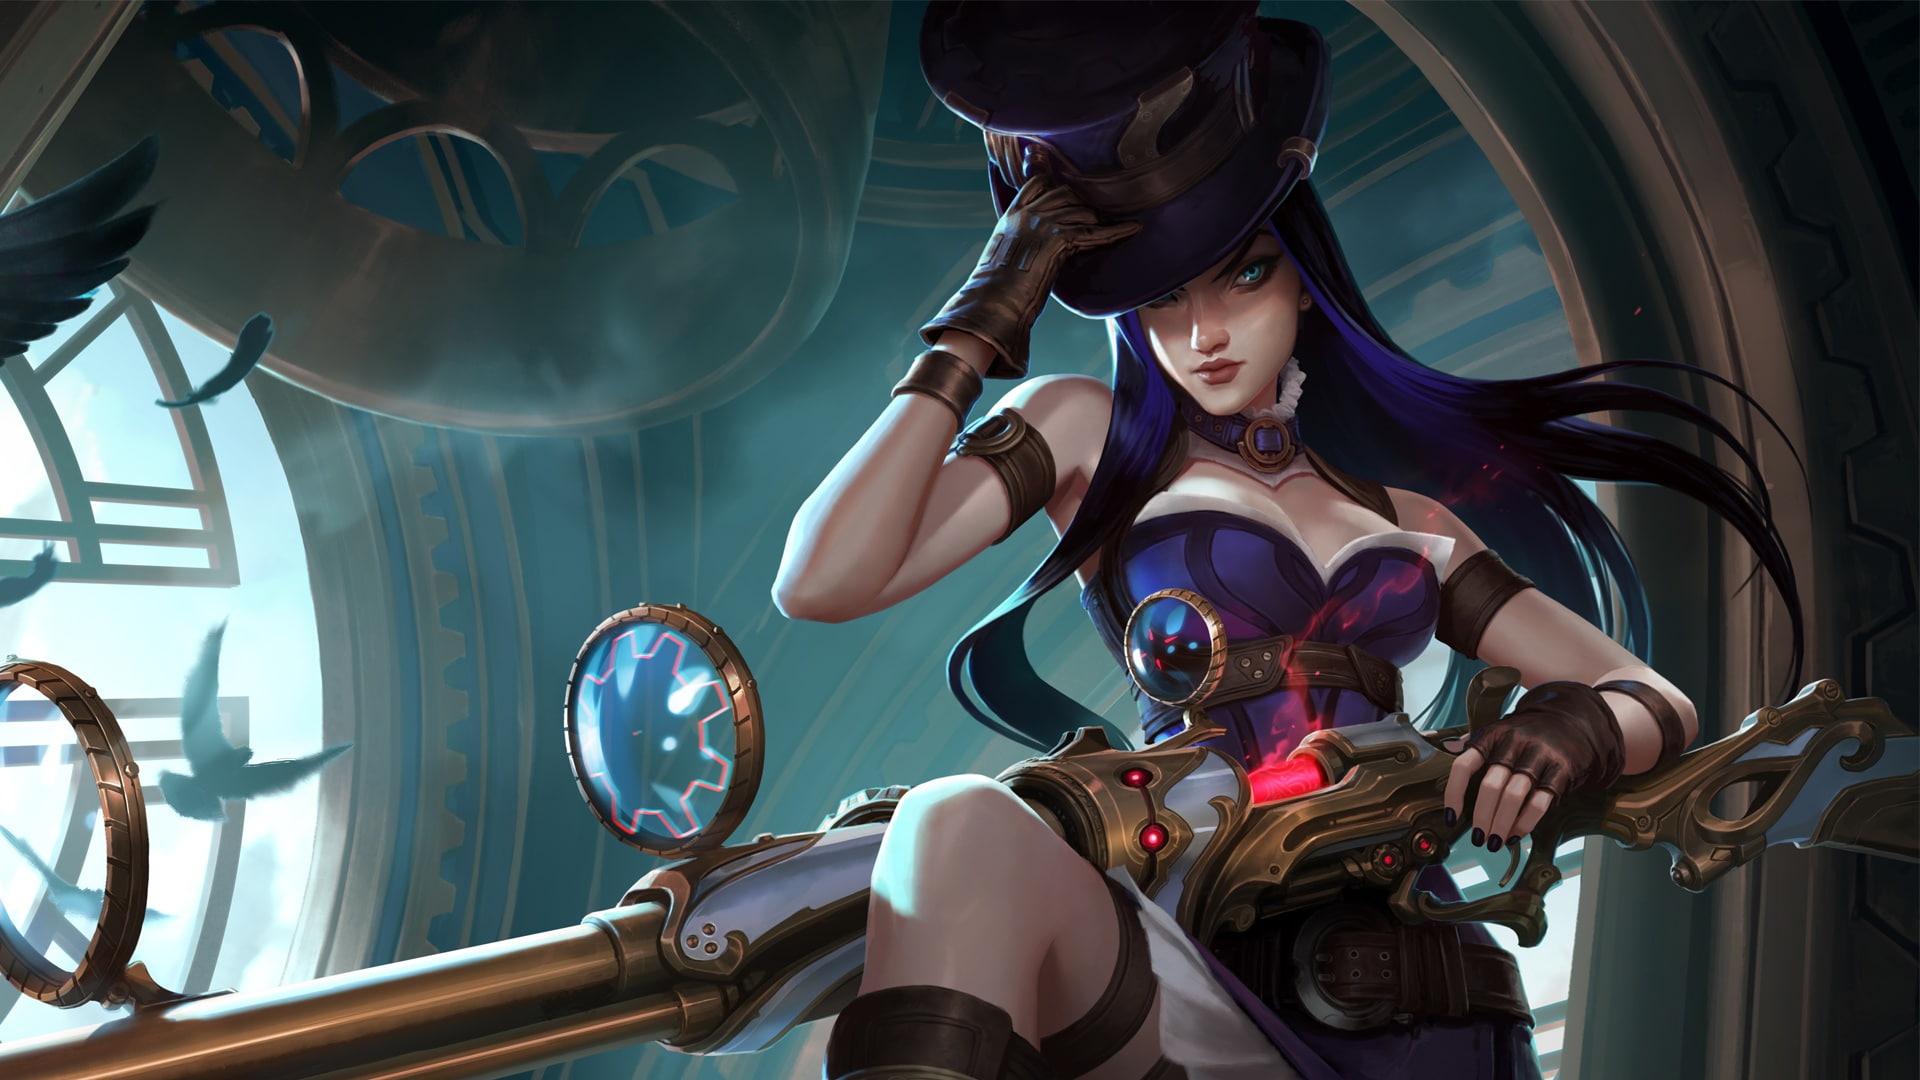 girl, fantasy, game, long hair, weapon, hat, blue eyes, League of Legends